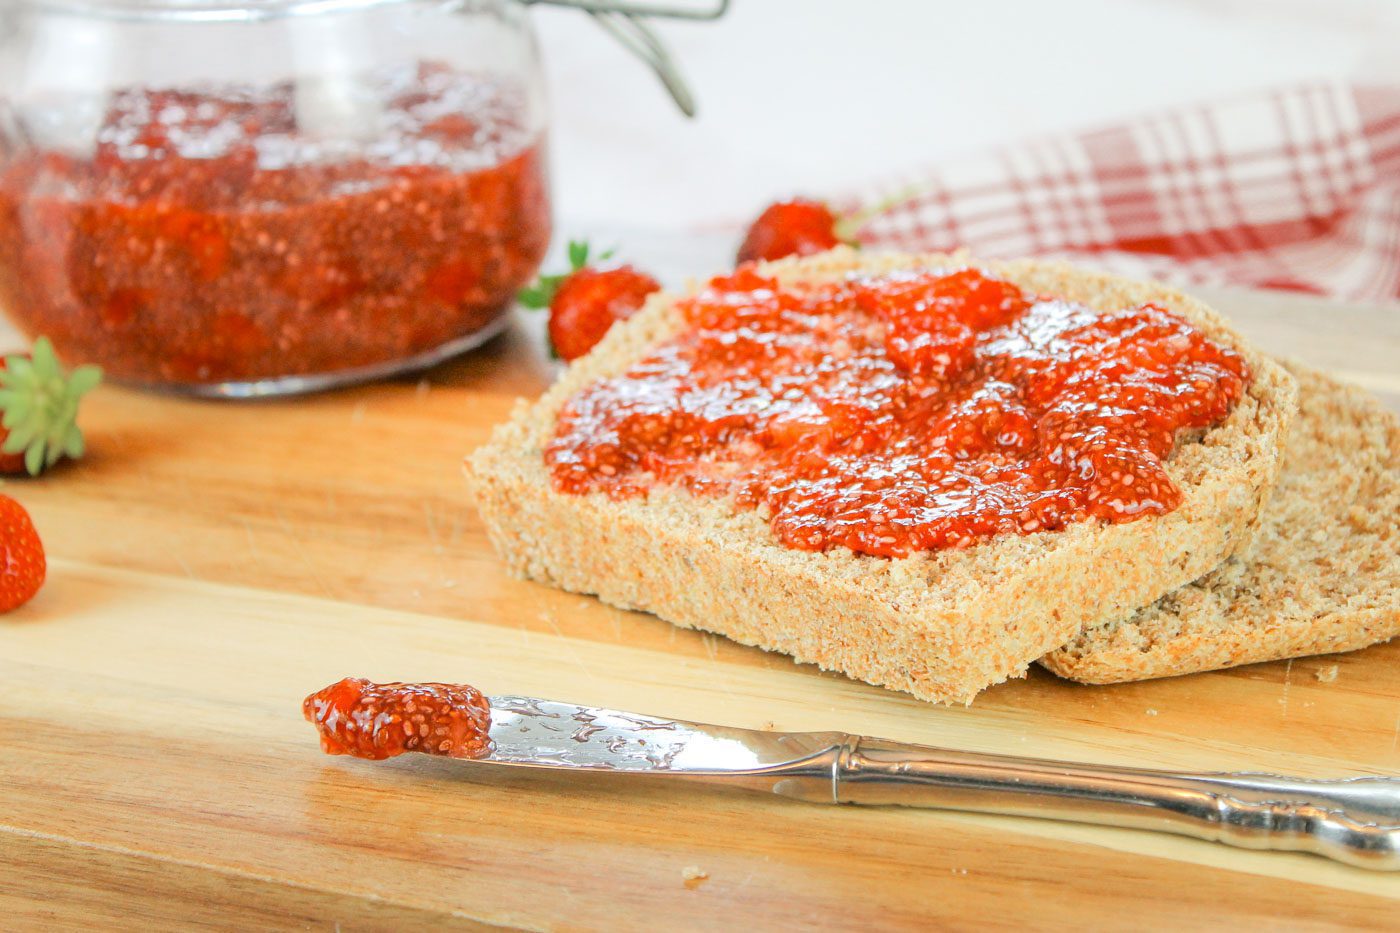 two slices of bread spread with strawberry jam